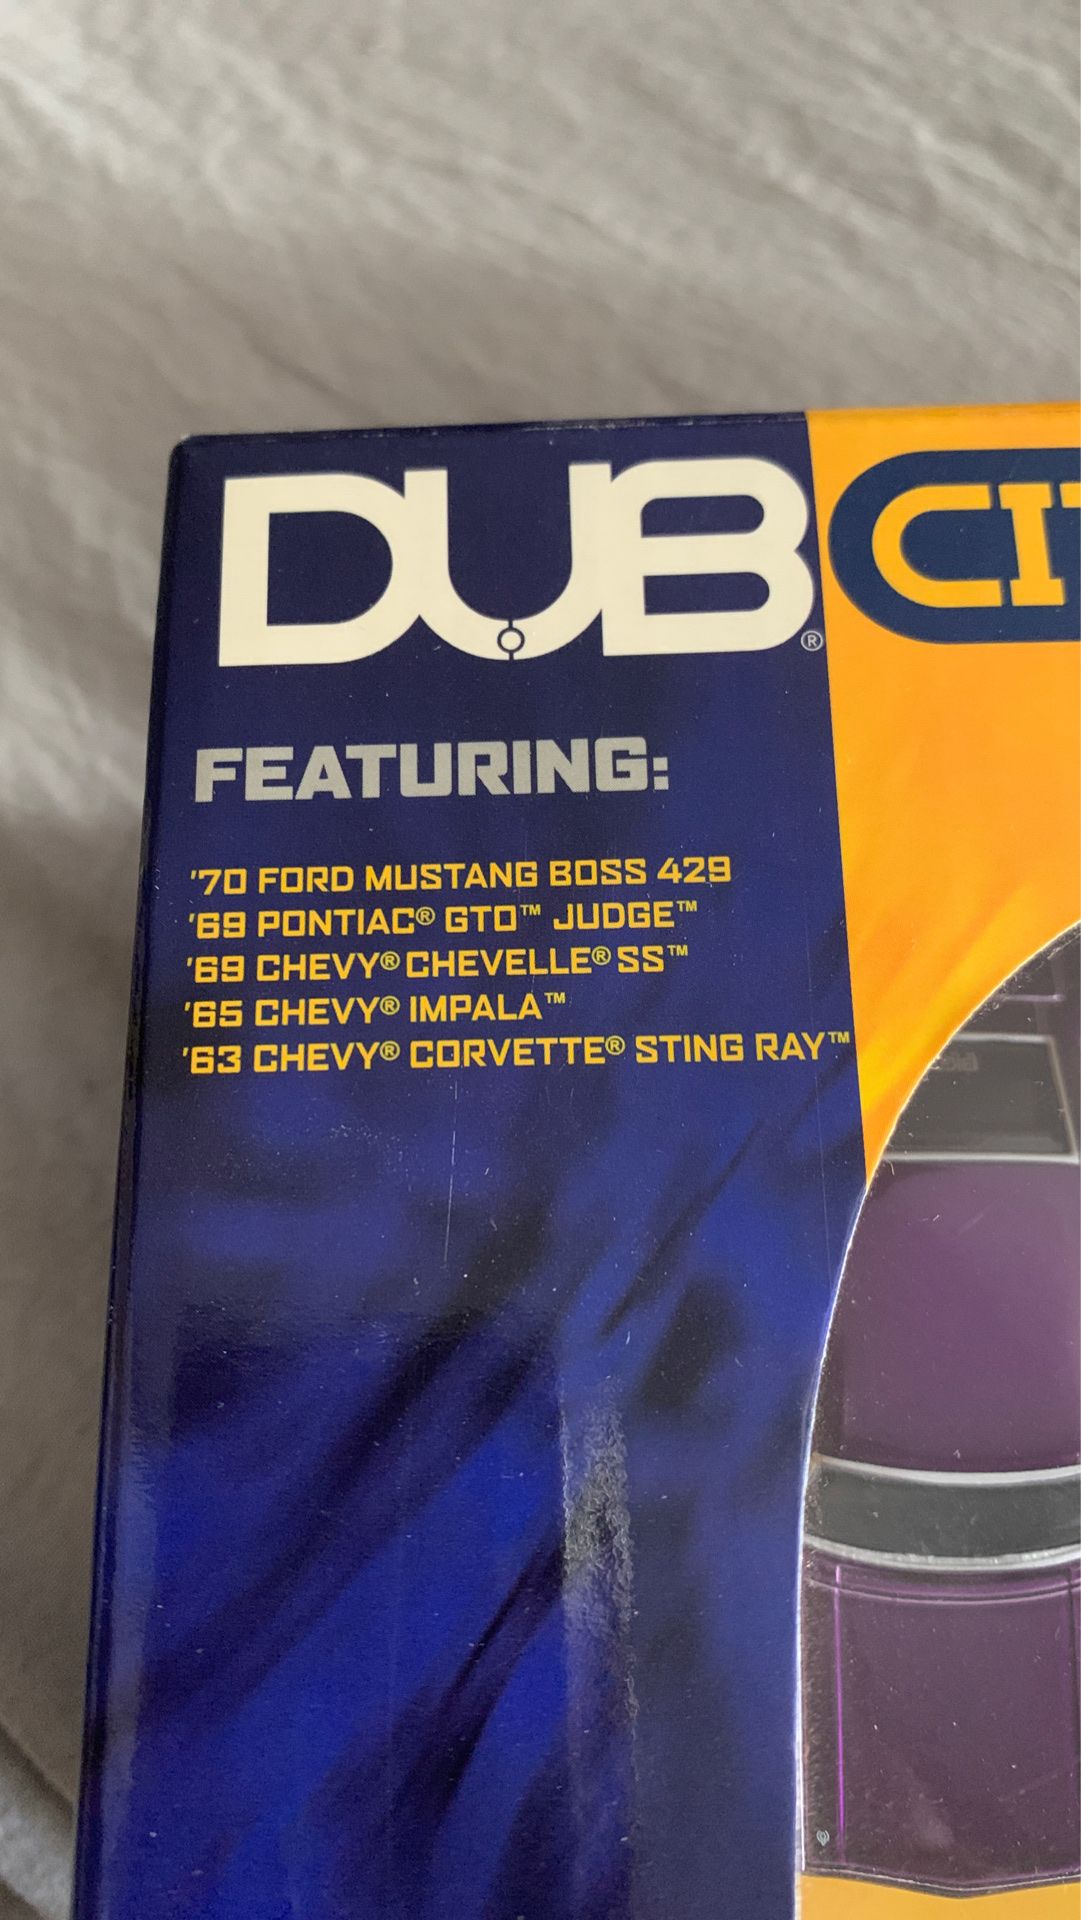 Dub City 5 Deep 1:64 collectible die cast classic cars